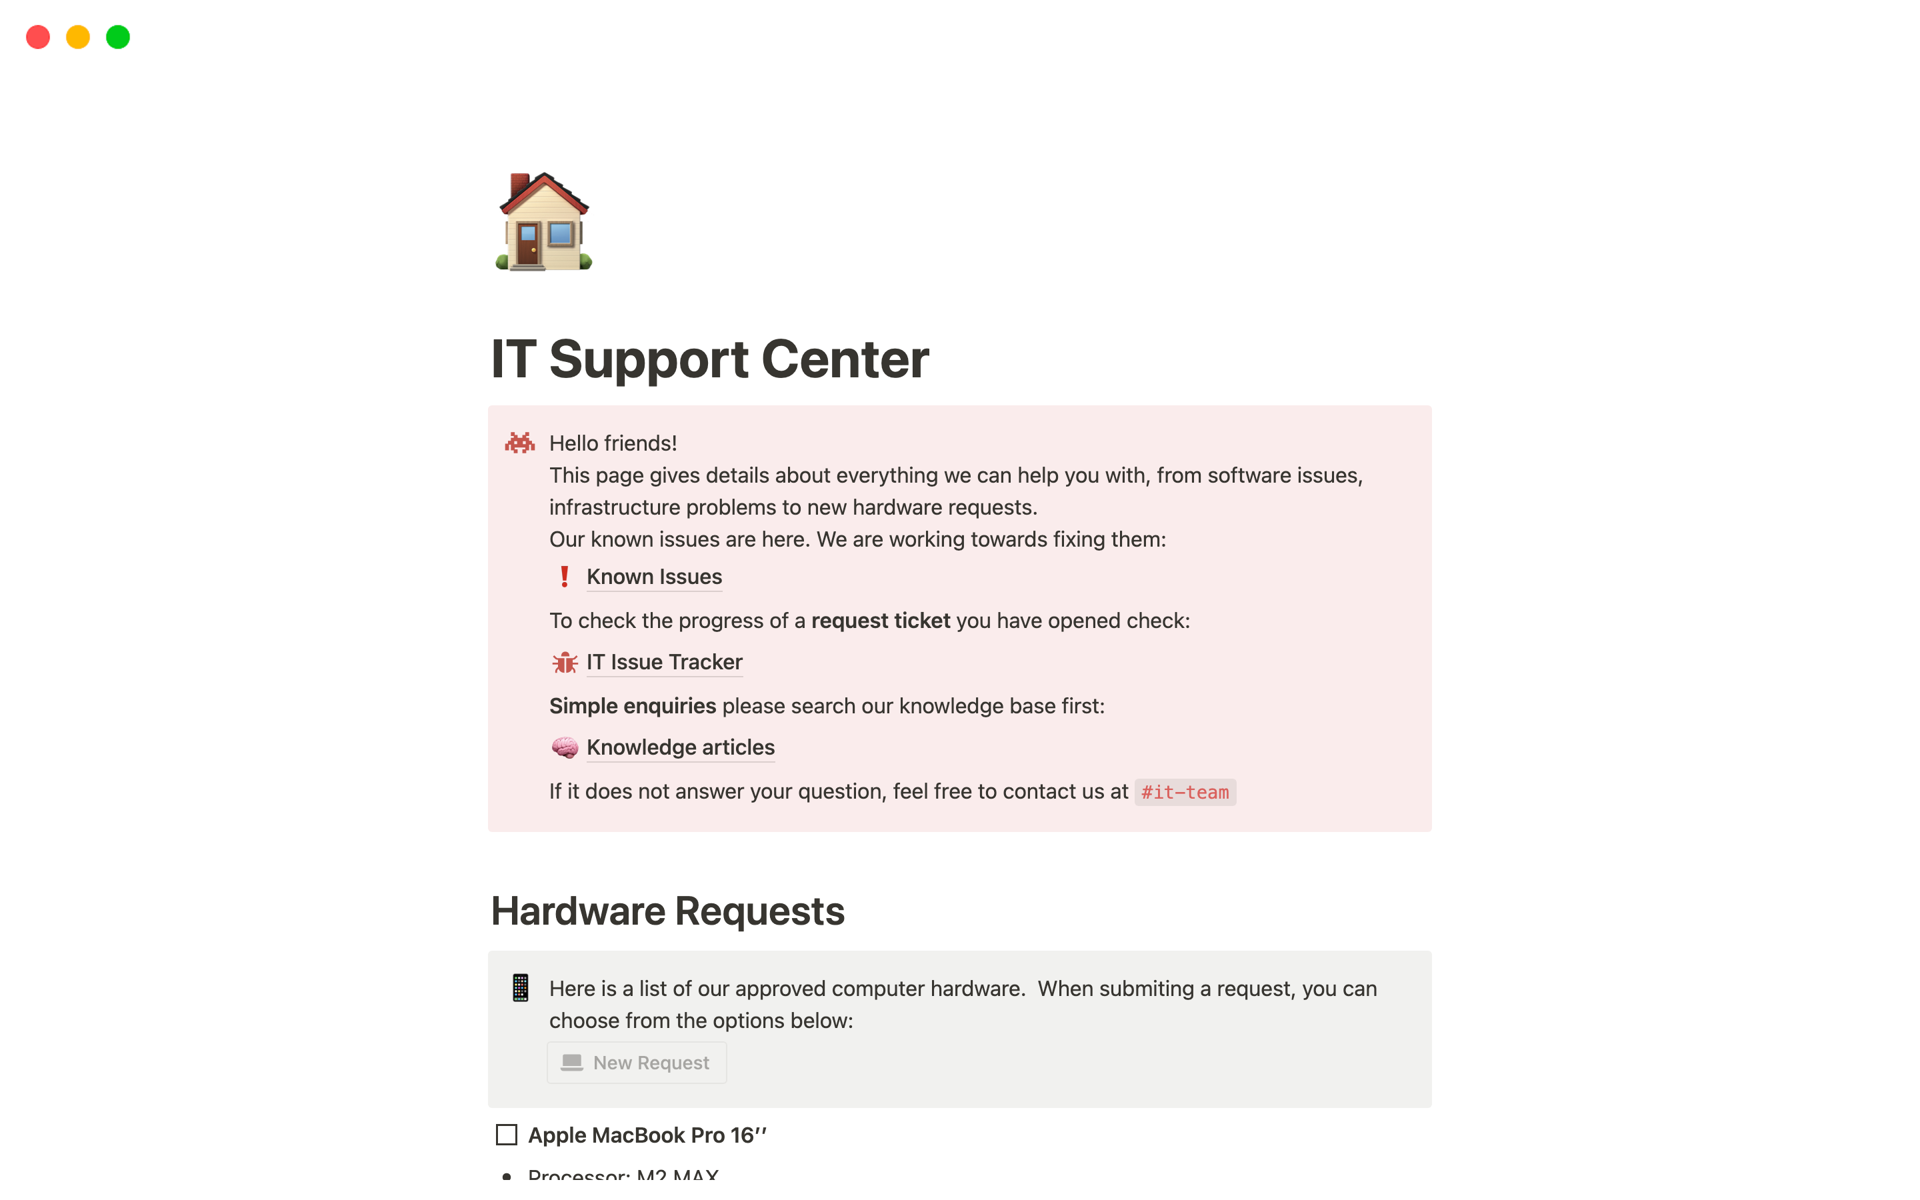 The central page for employees in need of support by the team.